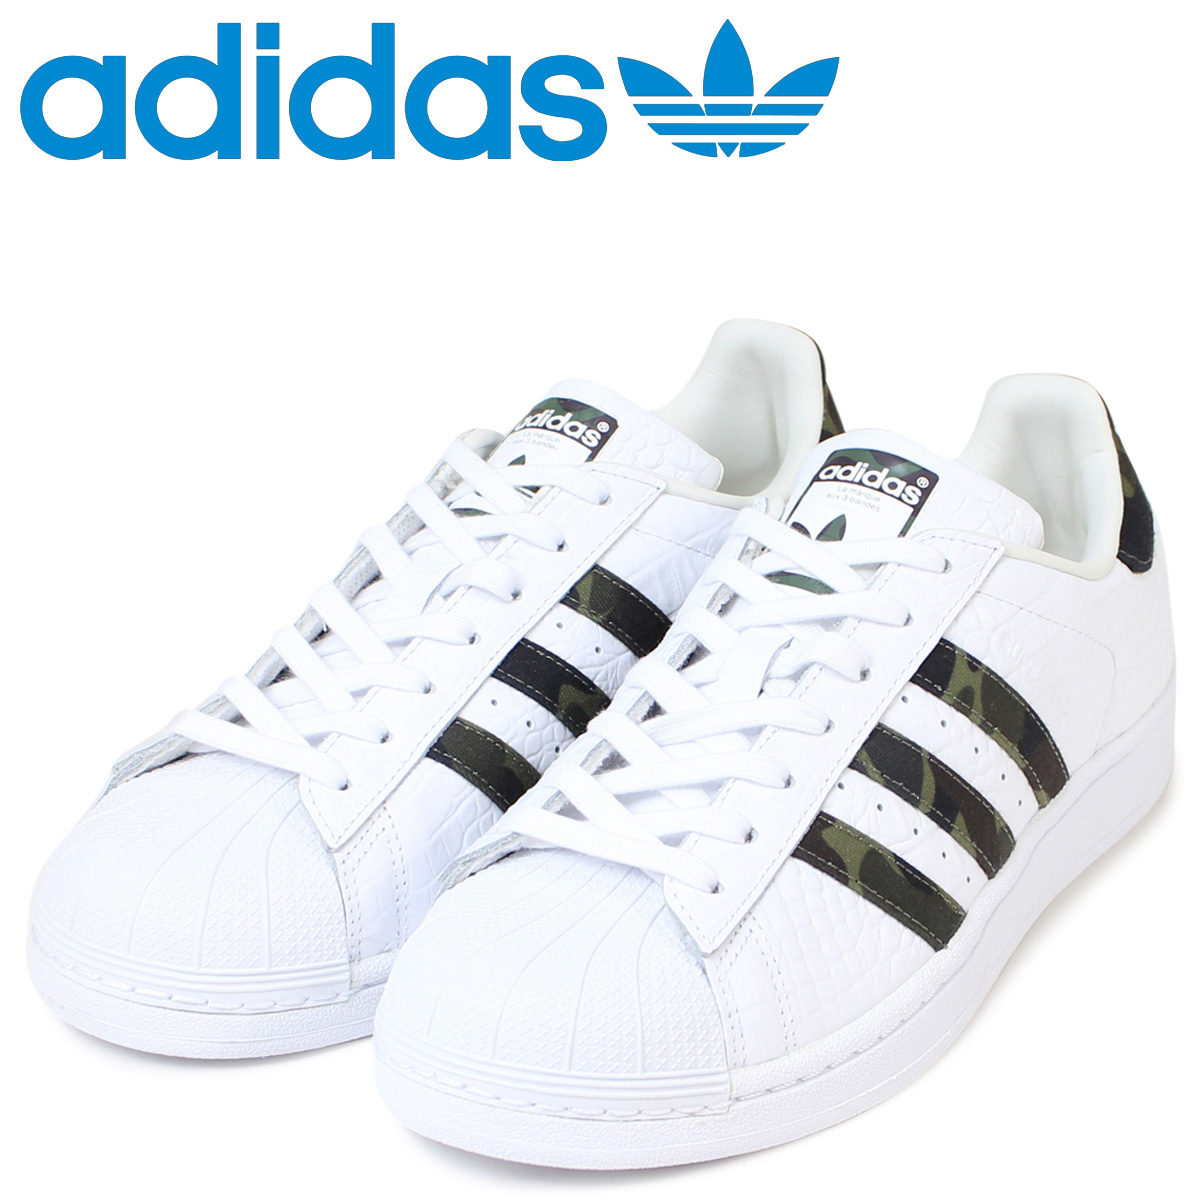 adidas shoes price in qatar